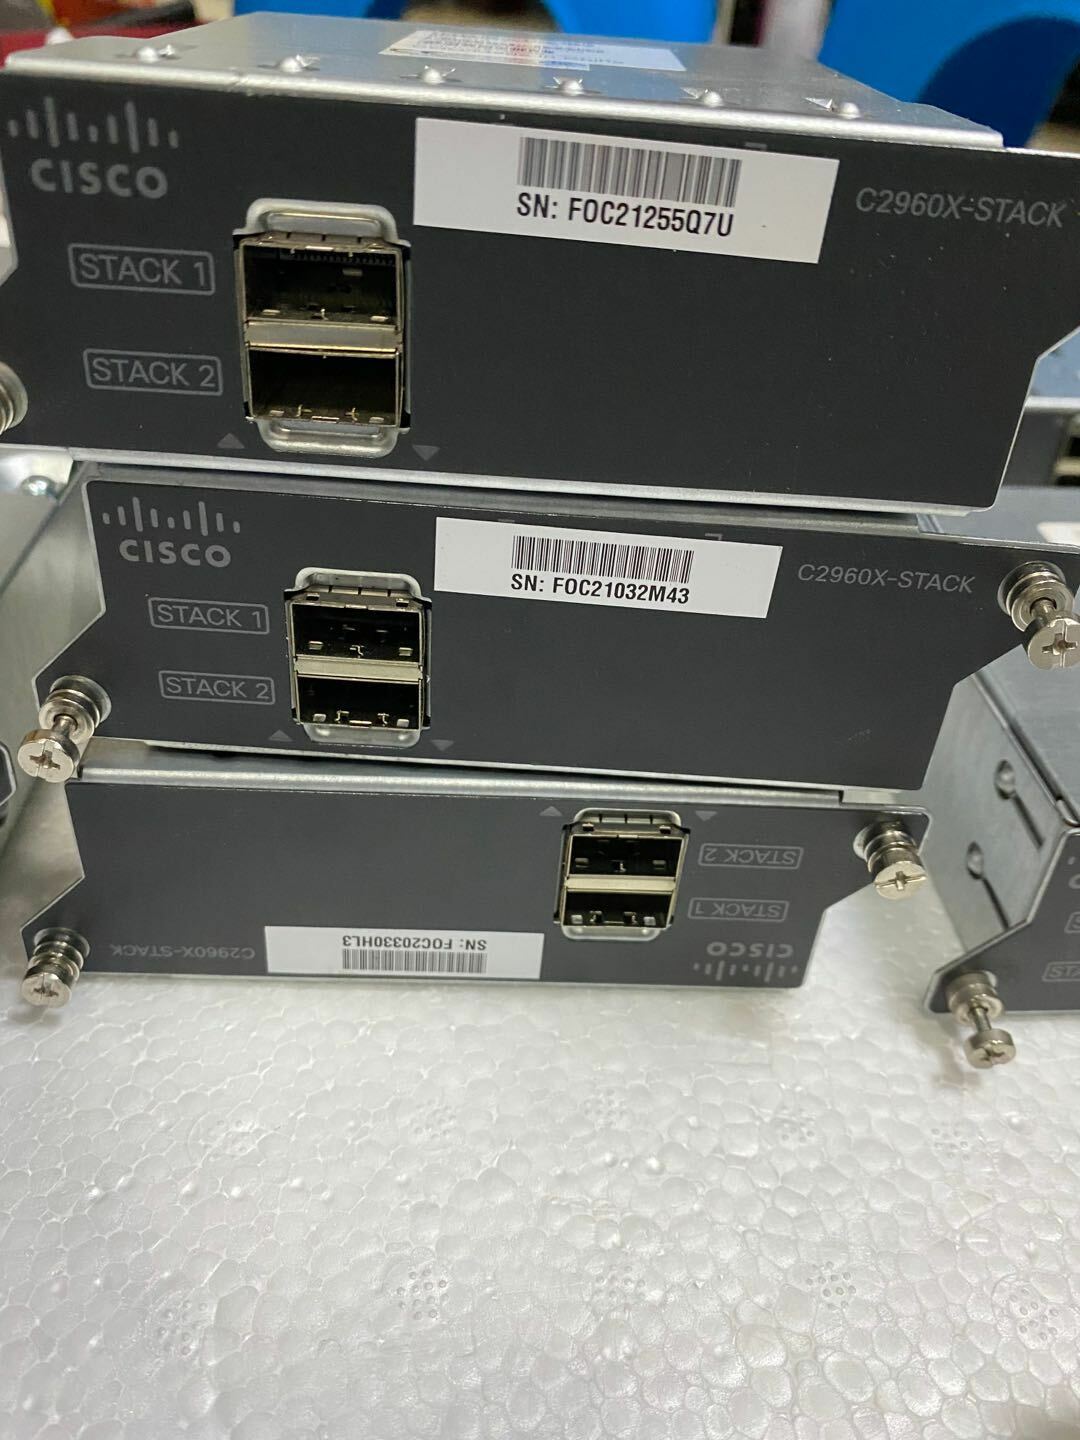 Cisco Genuine C2960x-stack C2960x-stack For 2960x Switch *fast Shipping*